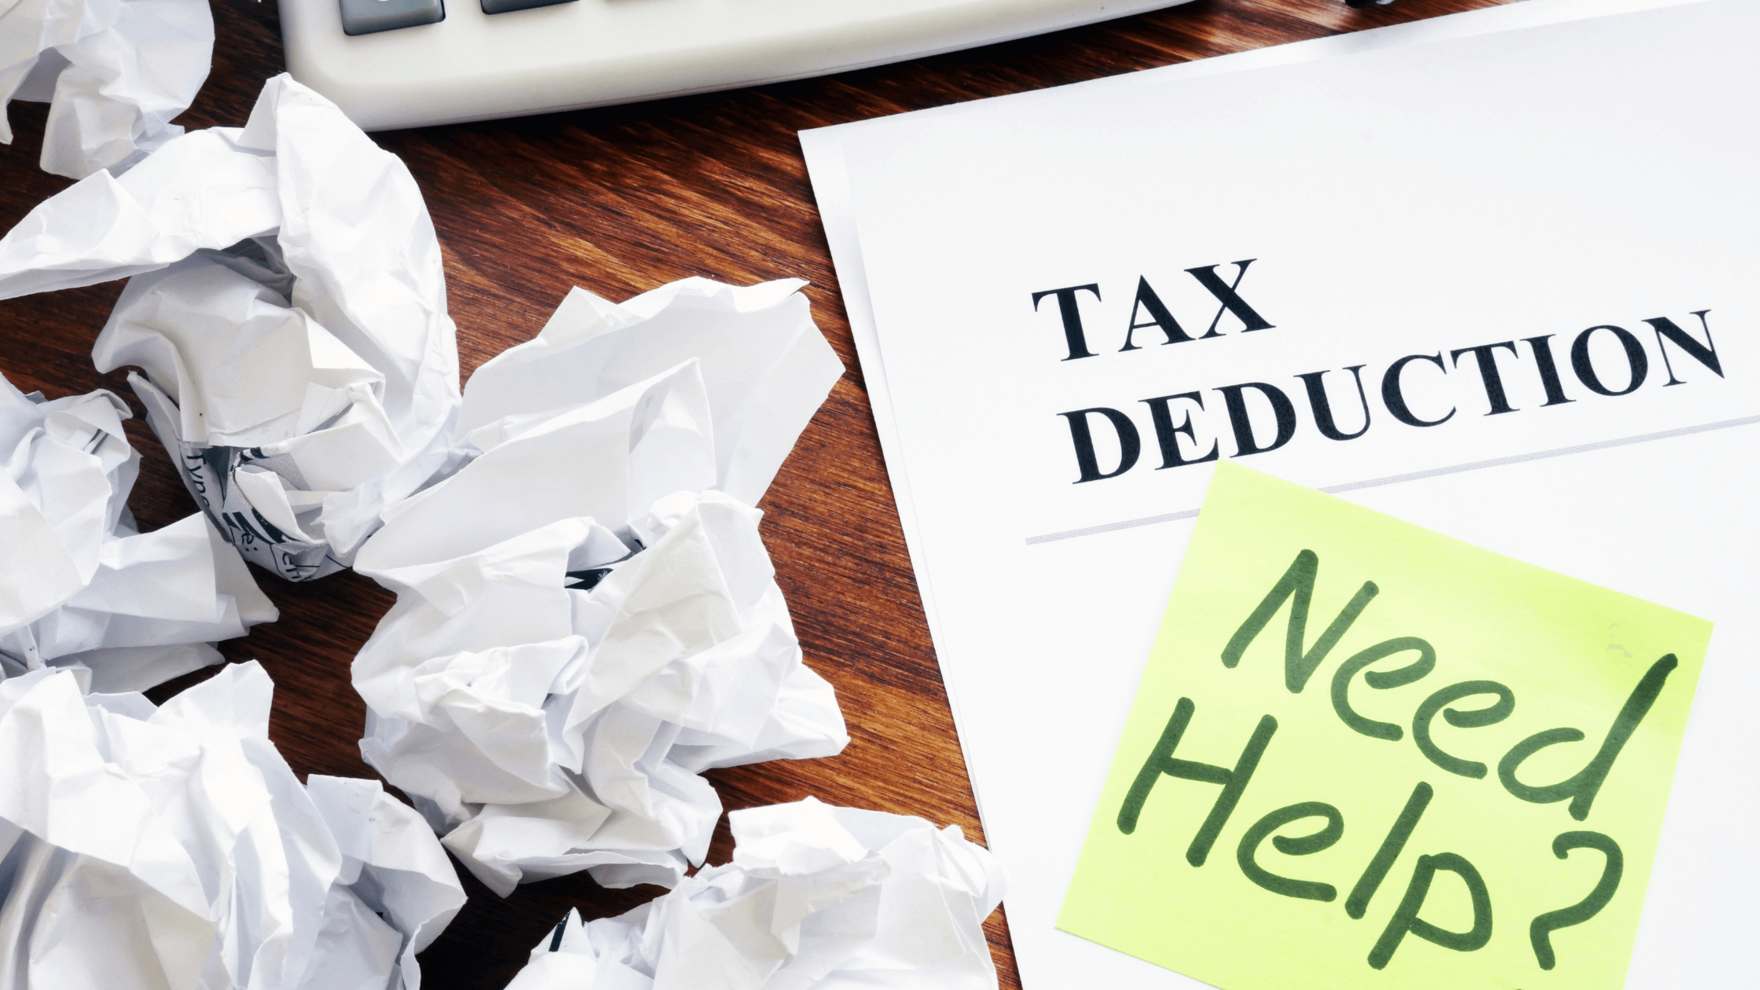 Business Numbers Blog - 5 Common Tax Deductions that Small Business Owners Often Overlook